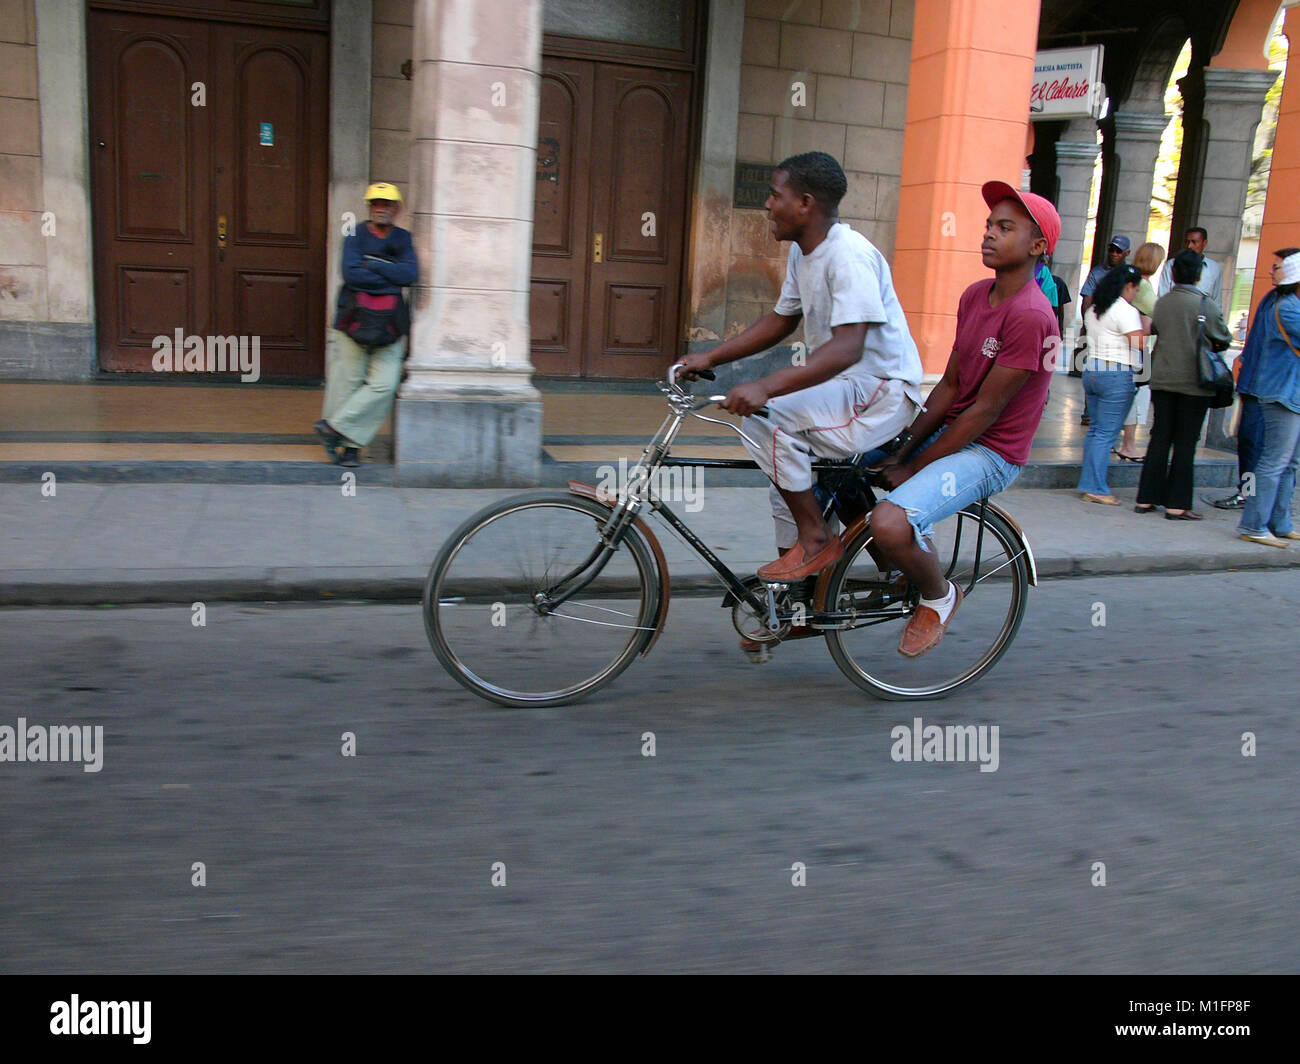 Feb 15, 2006; Havana, CUBA; Scene in Havana Viejo. One in eight cars in Cuba today is a pre-1960s American brand Ford, Chevrolet, Cadillac, Chrysler, Packard and other classic models. The Republic of Cuba is located in the northern Caribbean and south of the United States. The first European to visit Cuba was explorer Christopher Columbus in 1492. Centuries of colonial rule and revolutions followed. Batista was deposed by Fidel Castro and Che guevara in 1953. After the revolution trade with comminist Russia grew. The economy was hit hard in the 1990s following the collapse of the Soviet Union. Stock Photo